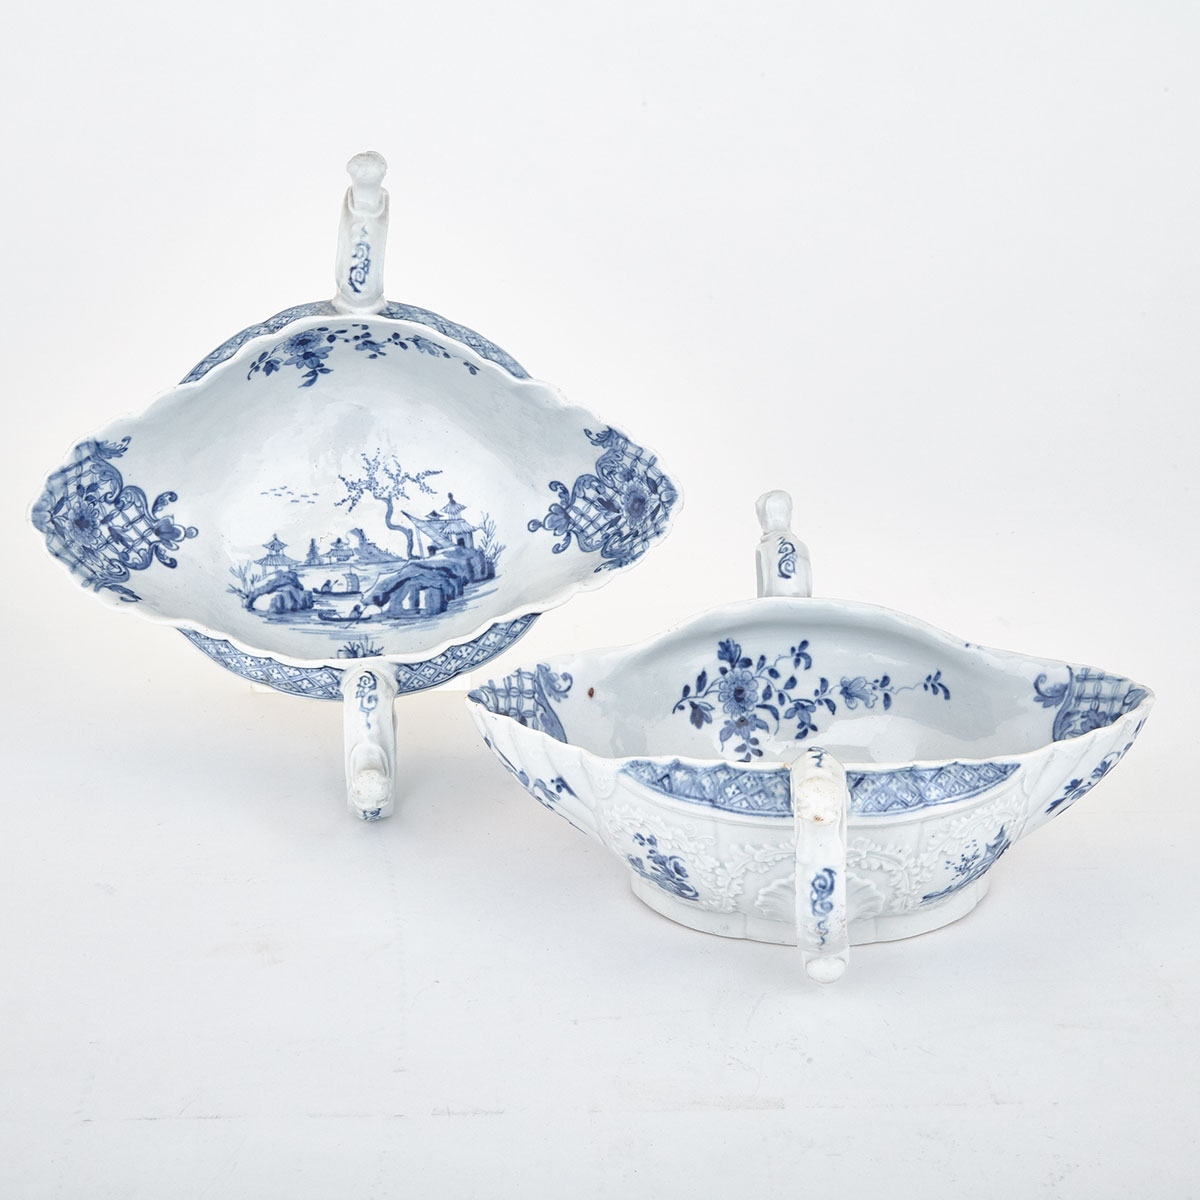 Pair of Worcester ‘Two-Handled Sauceboat Landscape’ Pattern Large Sauce Boats, c.1755-60